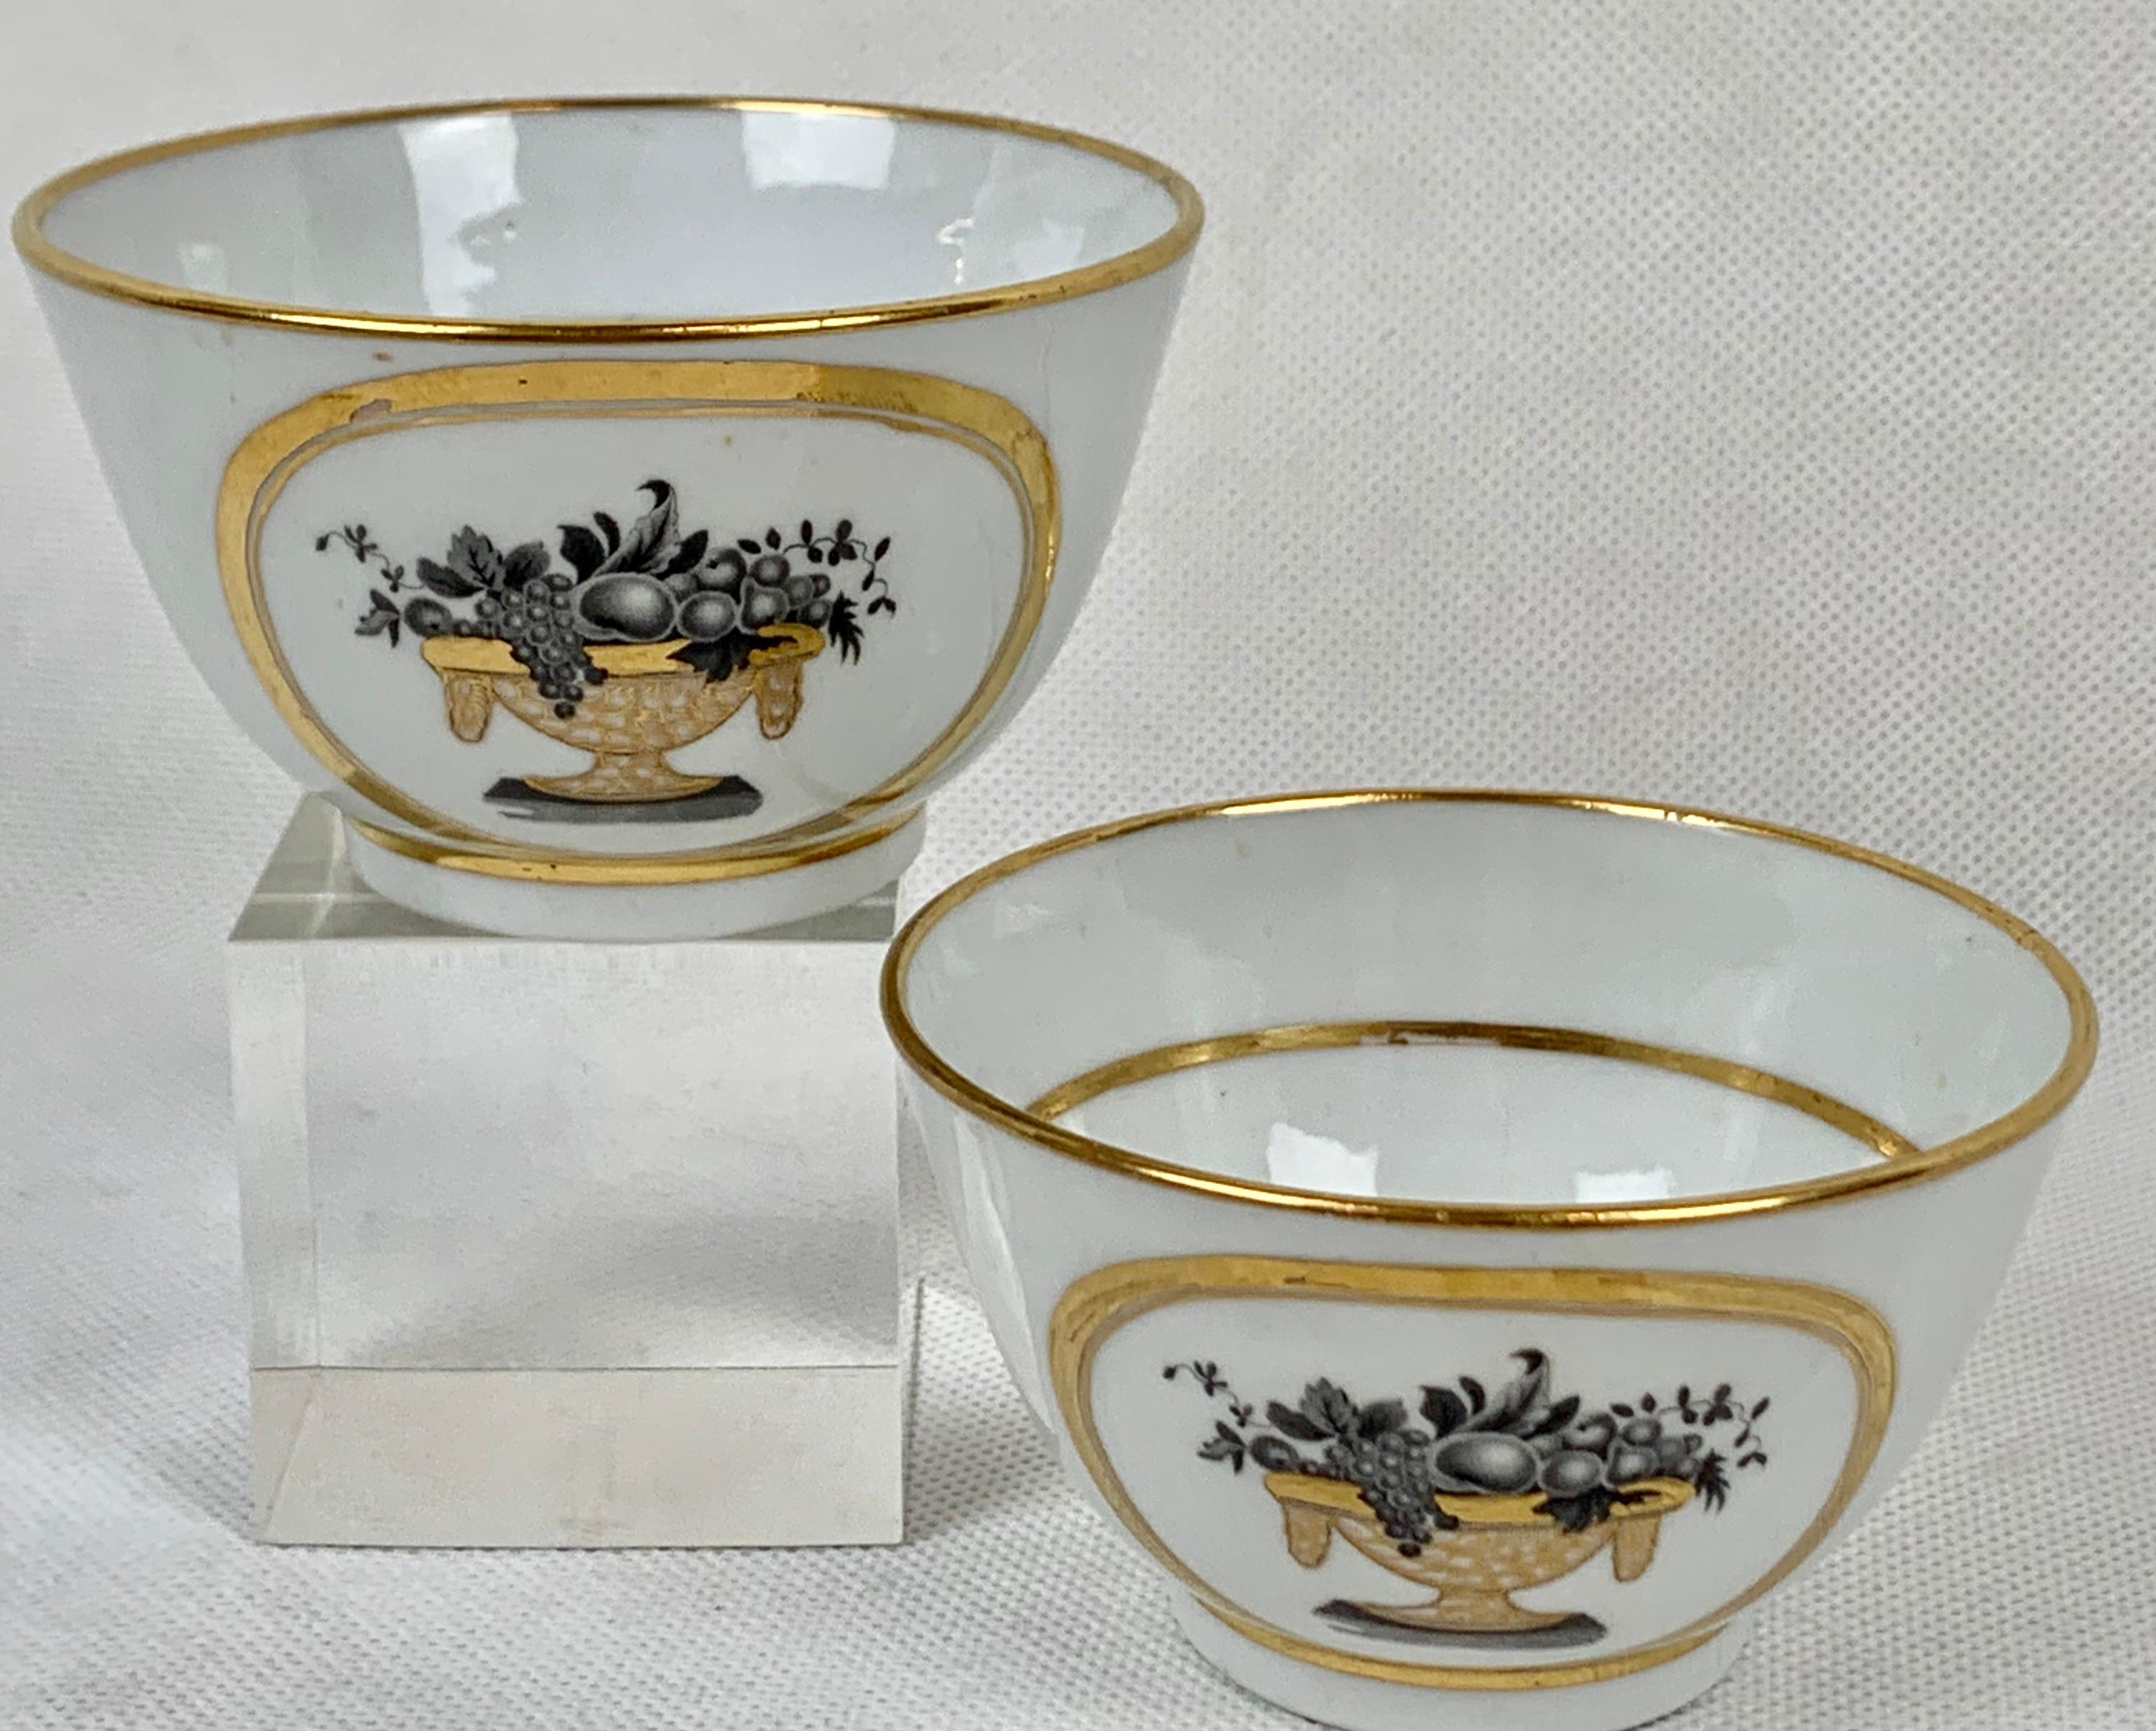 Pair of handleless tea bowls by the New Hall Porcelain Company Staffordshire, England, circa 1800. The scene depicts a footed porcelain bowl loaded with fresh fruit. The sides are decorated with gilt three leafed sprigs.
This pattern is in the